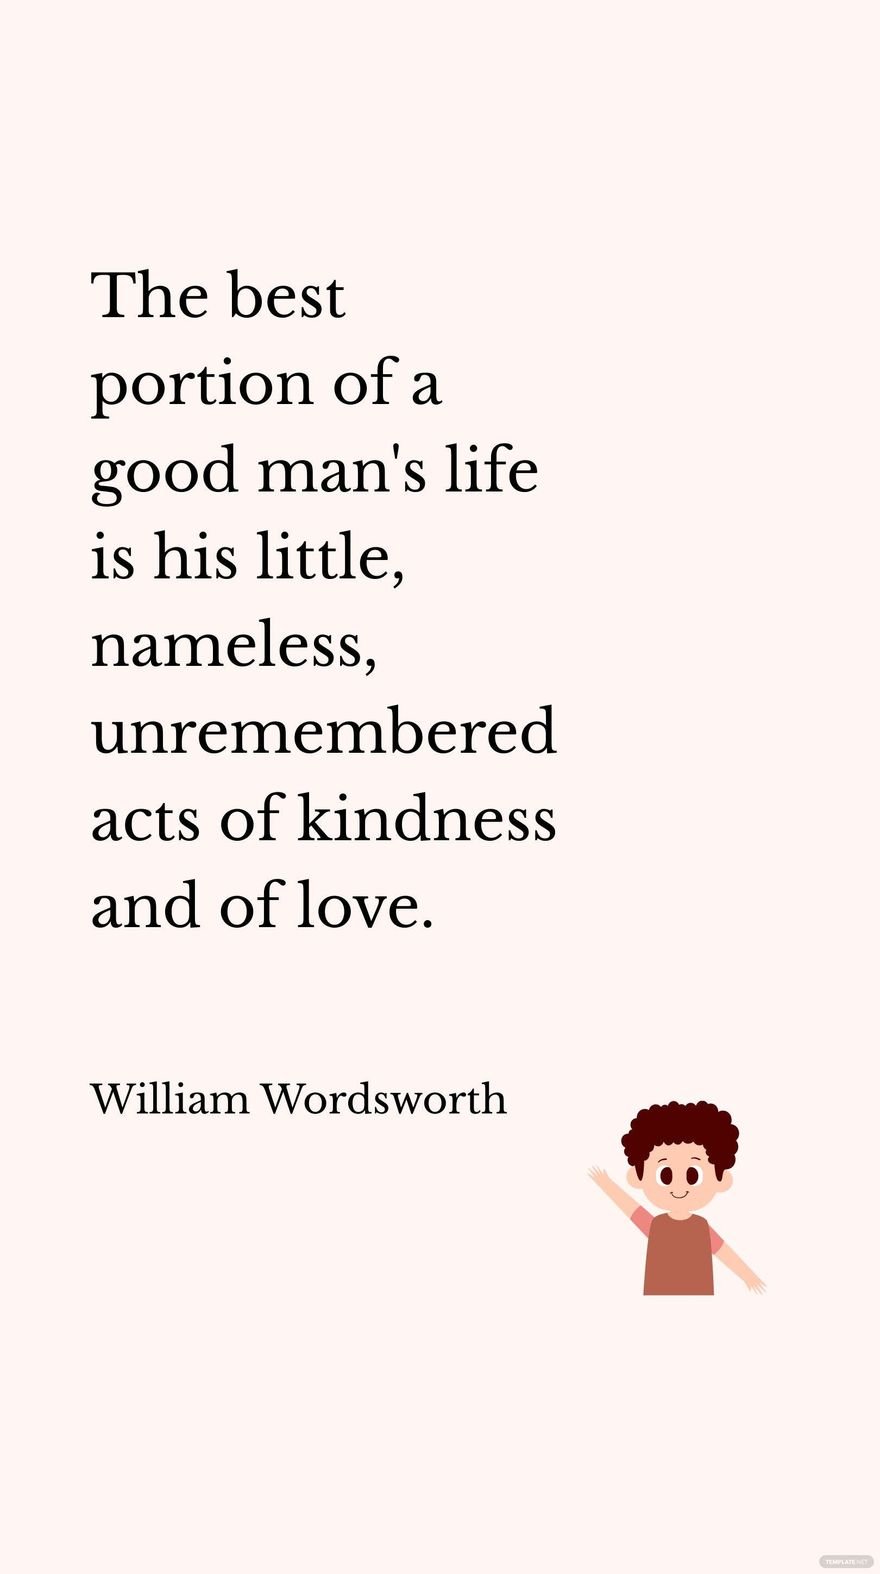 William Wordsworth - The best portion of a good man's life is his little, nameless, unremembered acts of kindness and of love. 